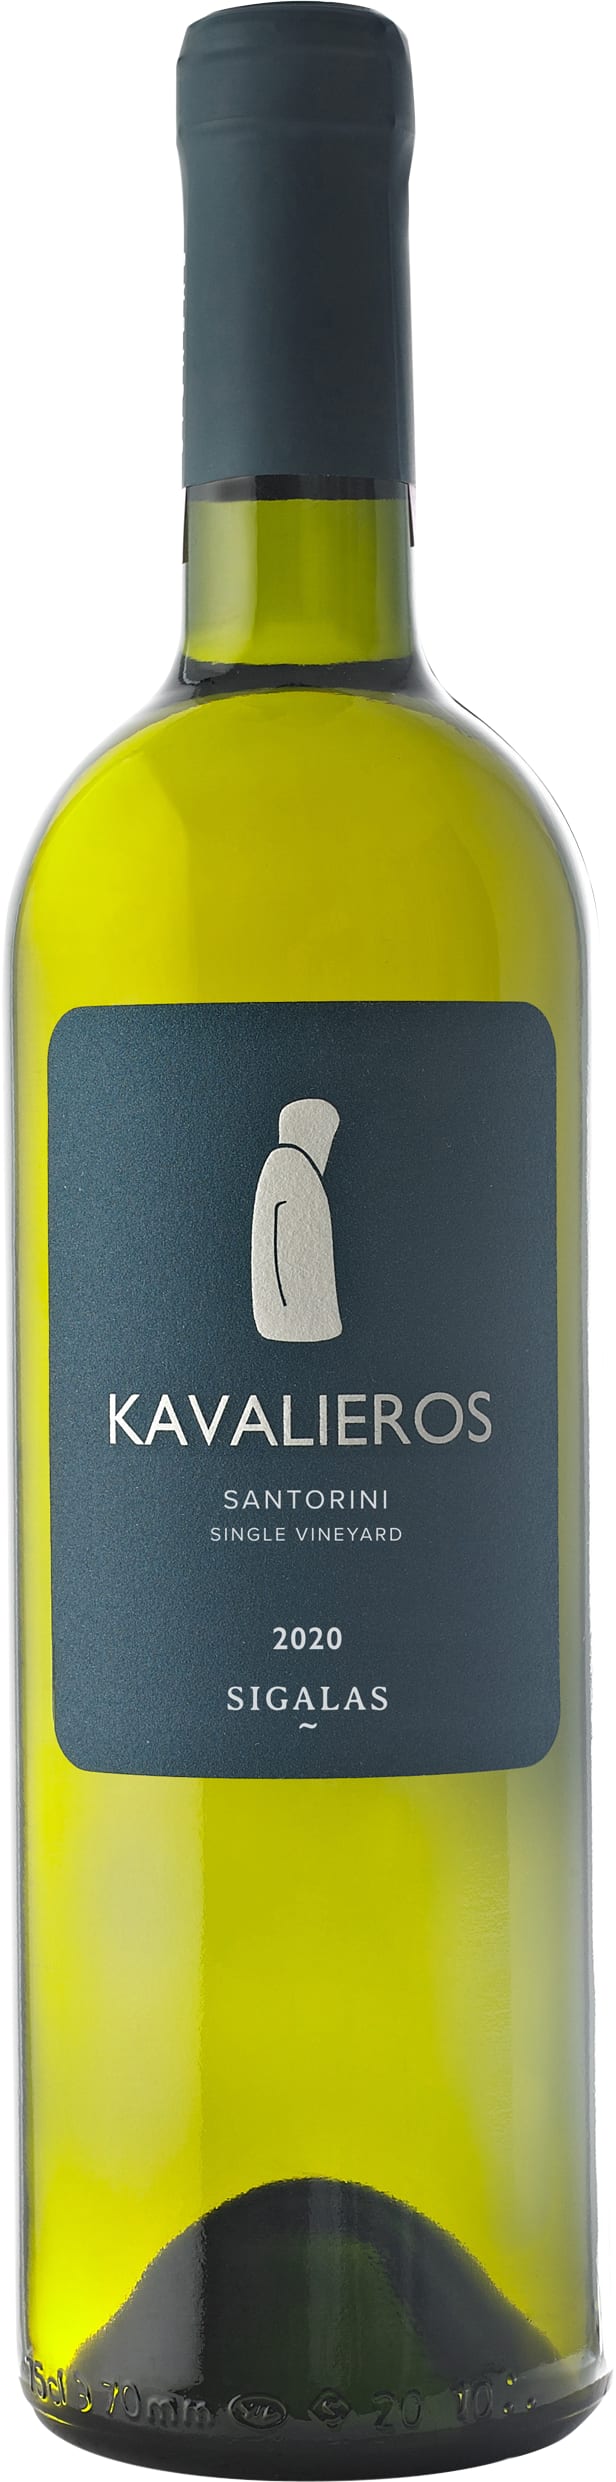 Sigalas Kavalieros 2021 75cl - Buy Sigalas Wines from GREAT WINES DIRECT wine shop